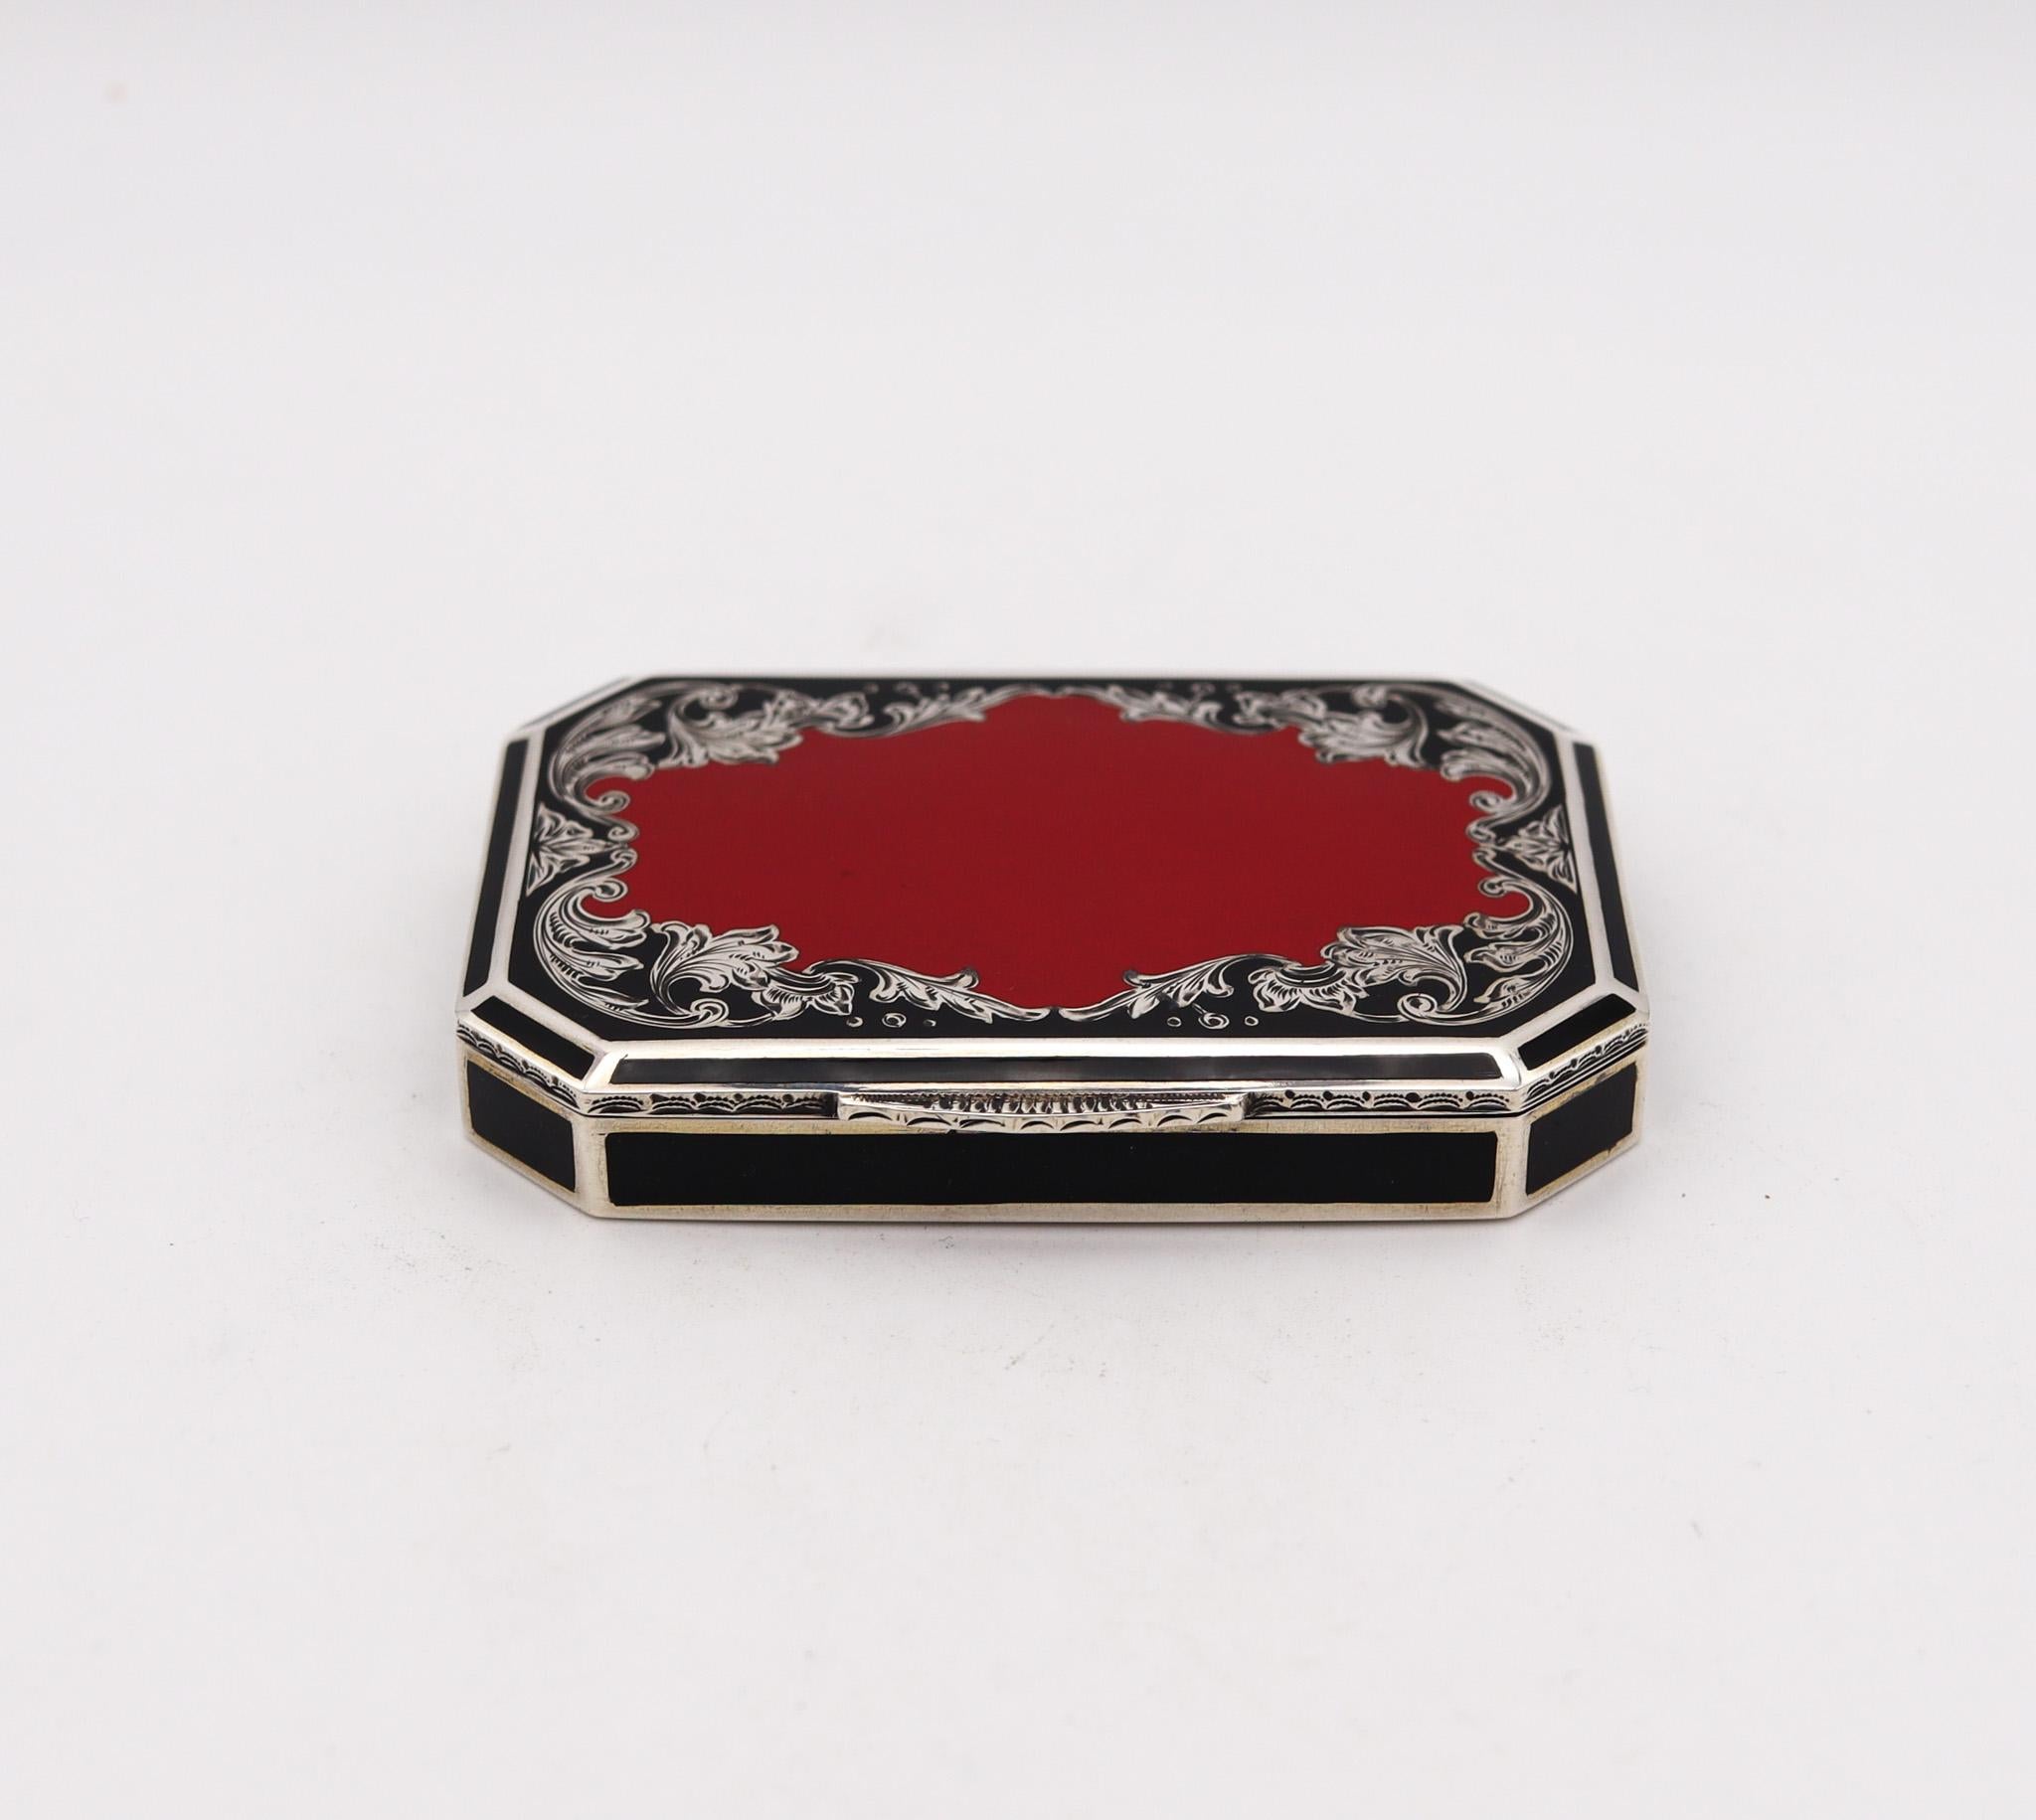 Austria art deco enamelled box designed by Leonhard Anzenhofer.

A very beautiful snuff-pills box, created in Vienna Austria at the silversmith atelier of Leonhard Anzenhofer, circa 1915-1920. This box is closely to mint condition with no trace of